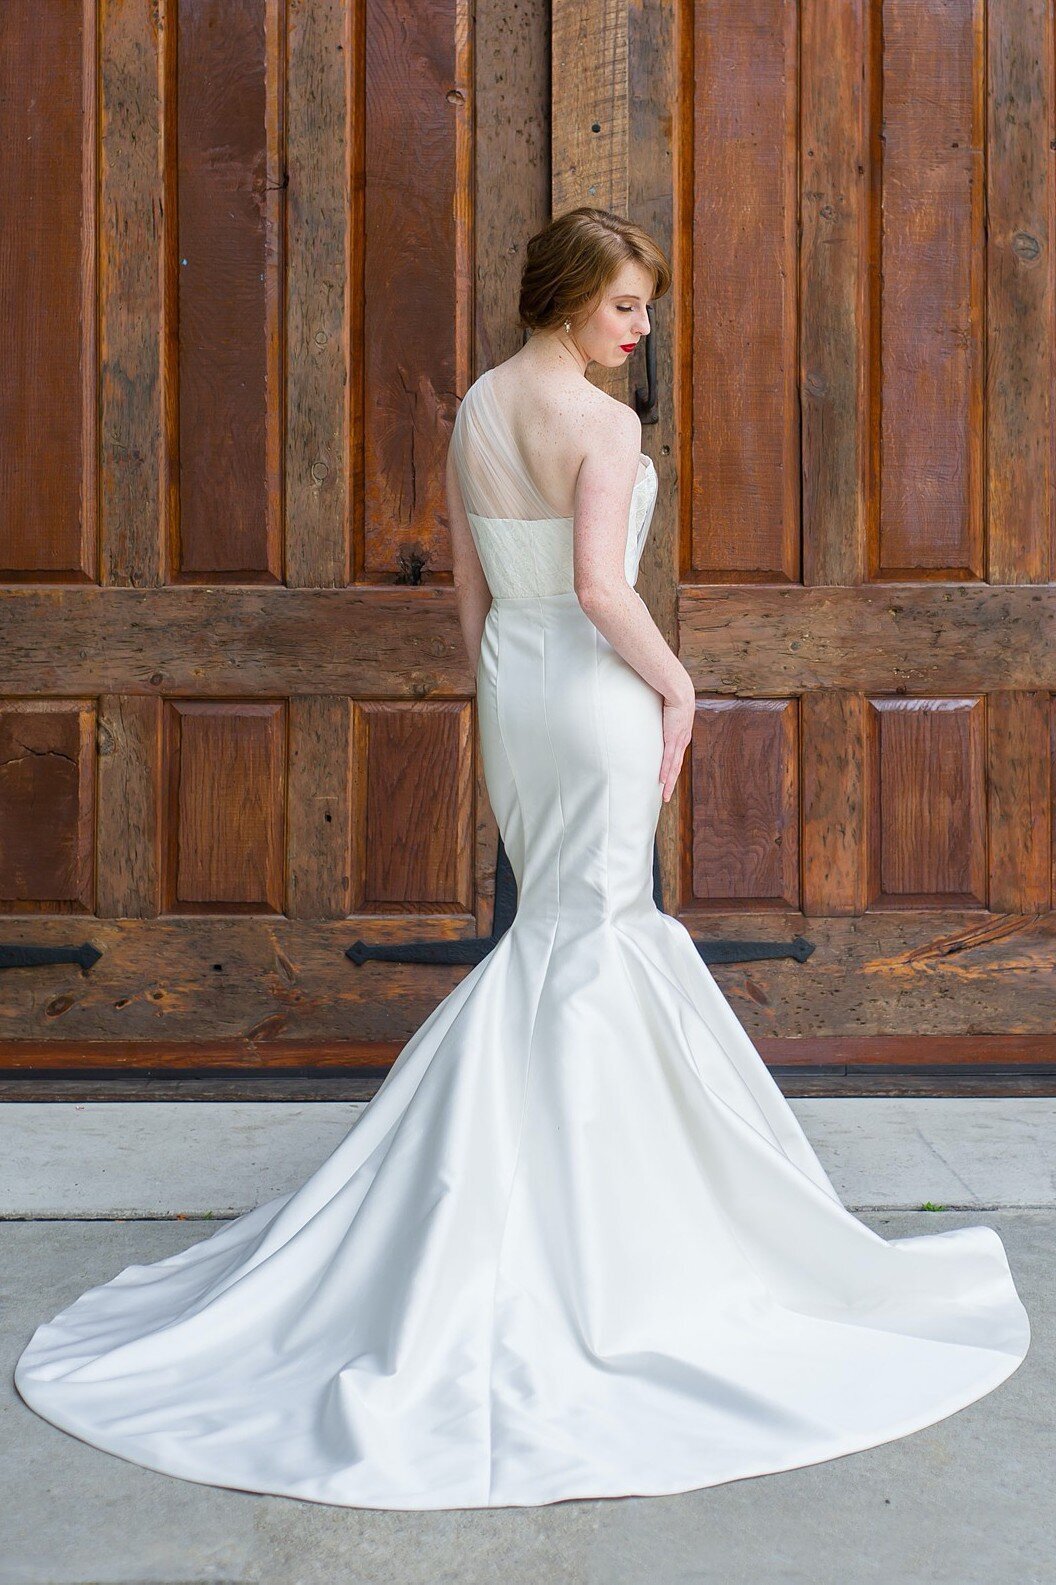 The flare of the mikado mermaid skirt is accentuated by the train for a dramatic but timeless bridal look.